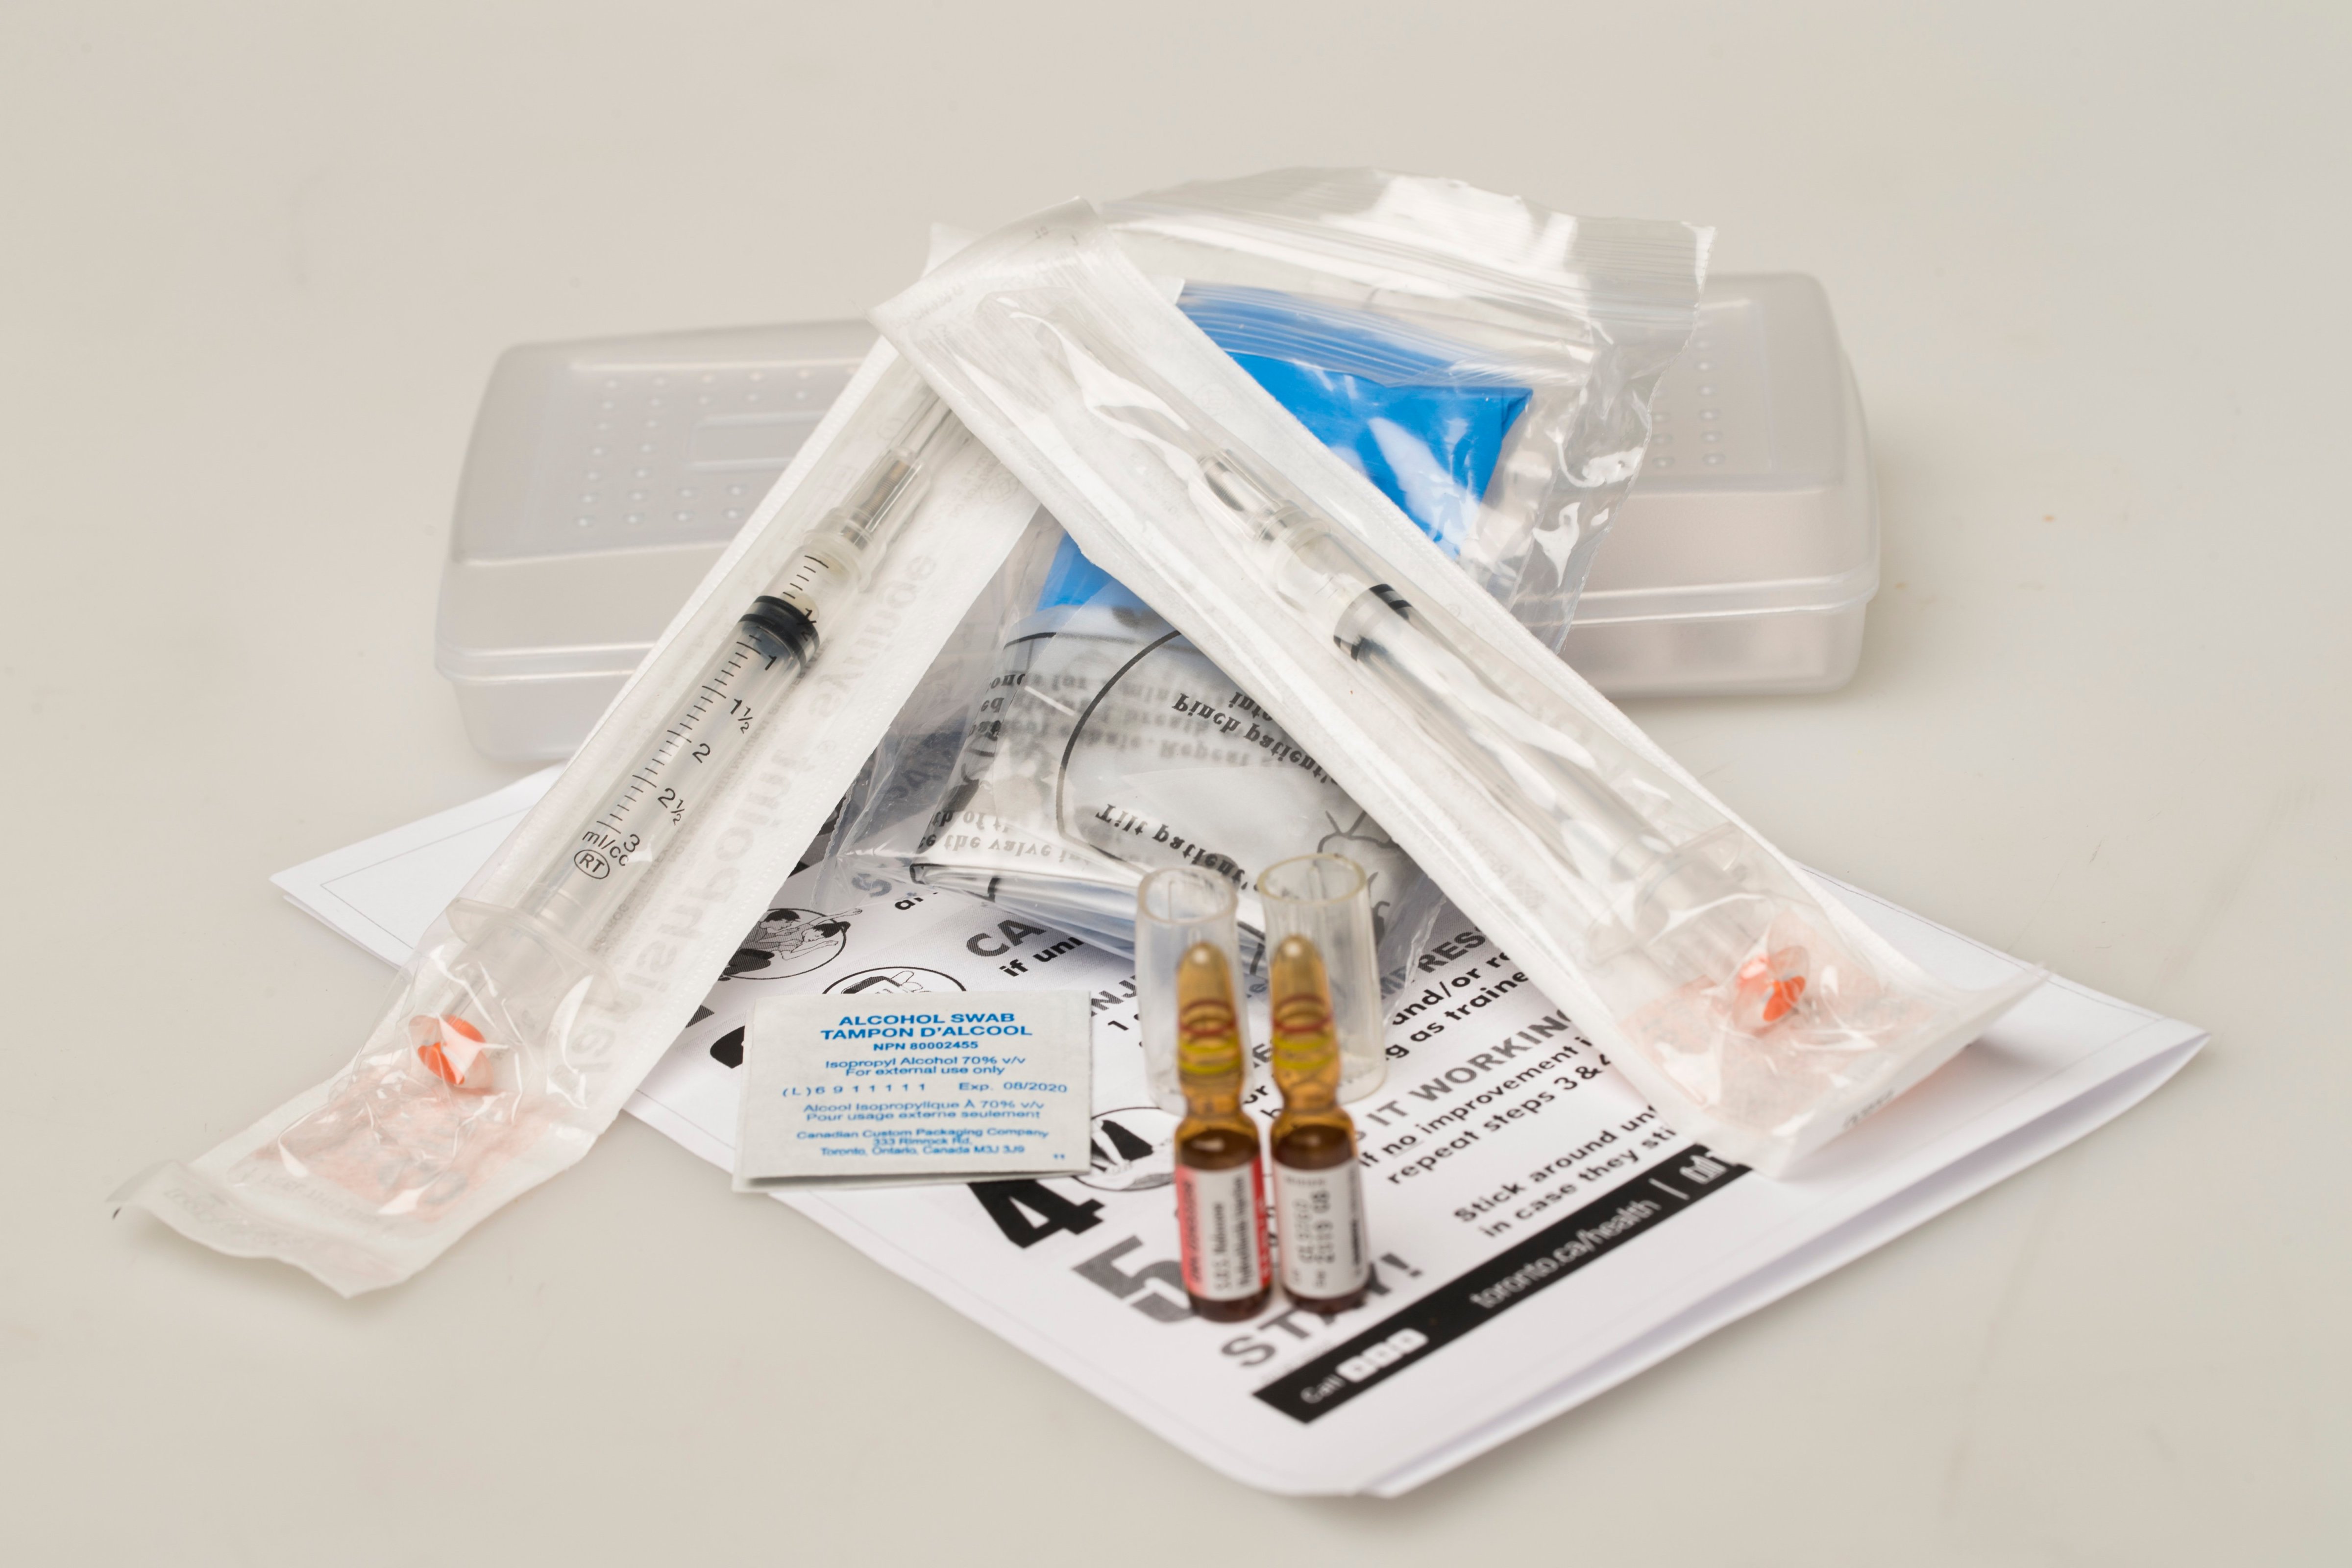 Naloxone kit, as purchased over the countrer.